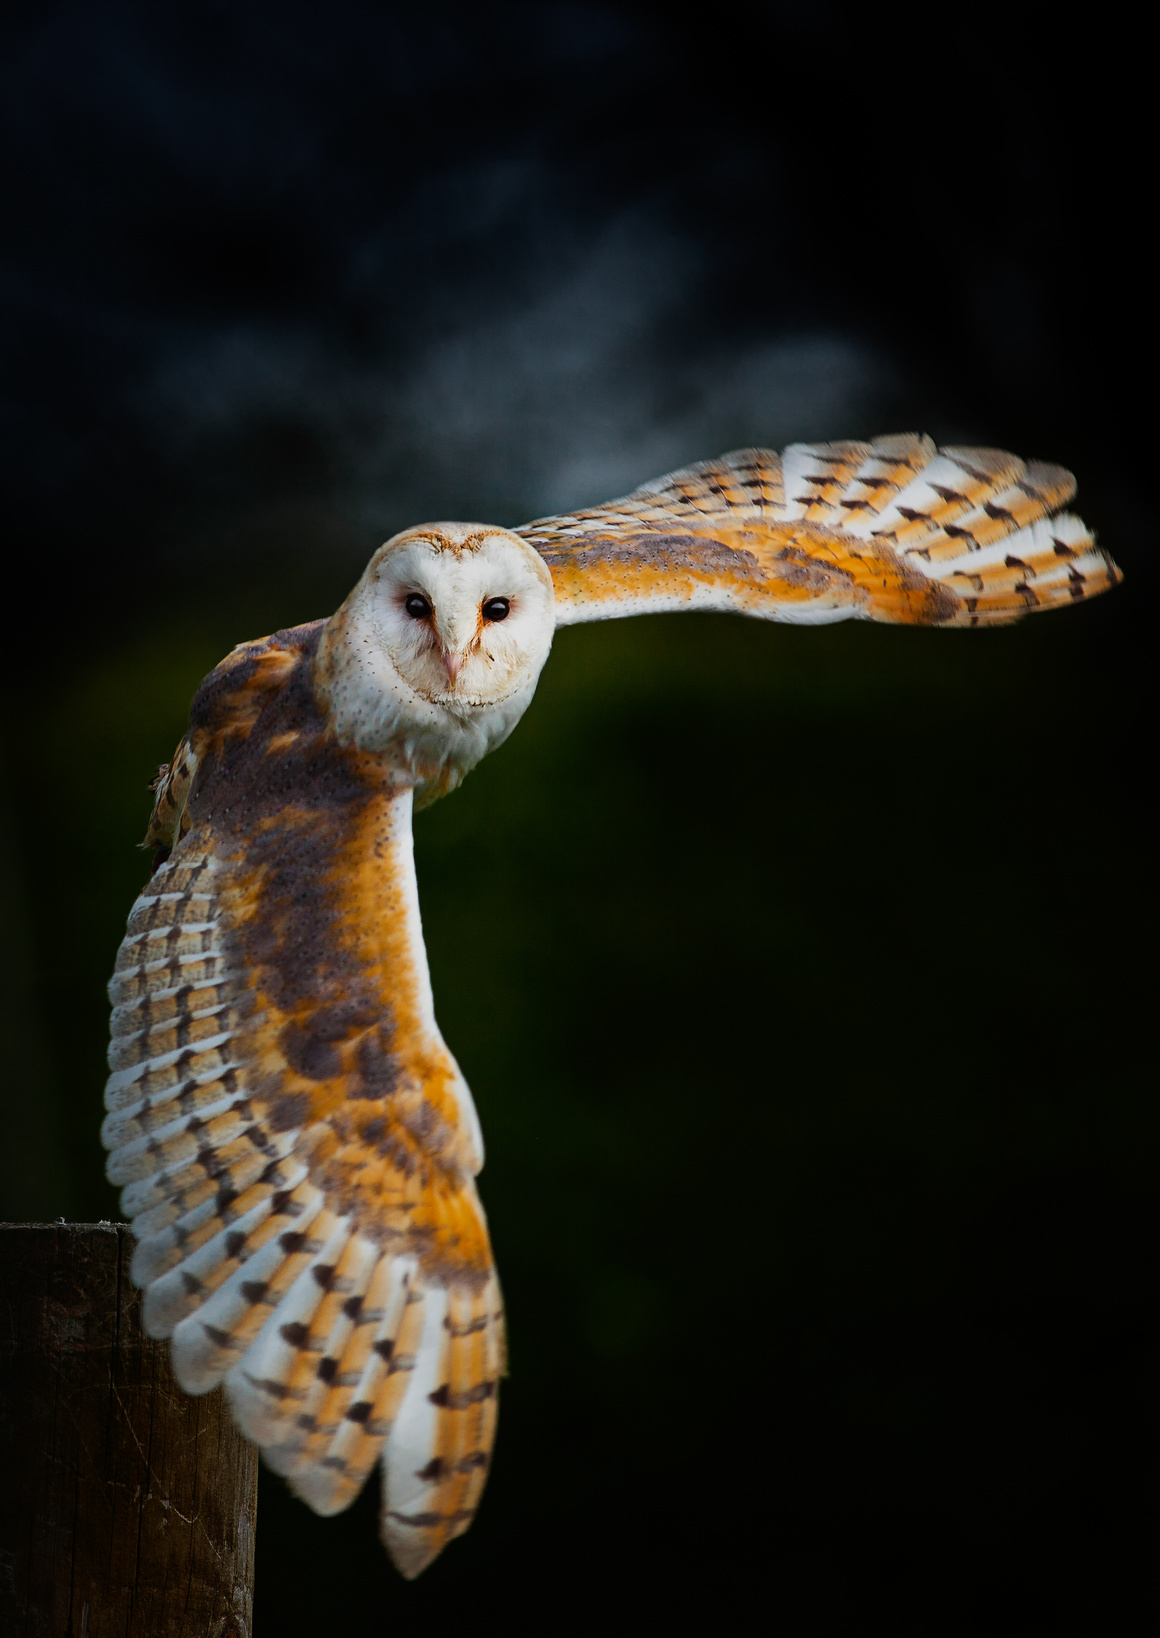 http://www.townandcountryfalconry.co.uk/wp-content/uploads/2016/12/Fotolia_88601644_Subscription_Monthly_M.jpg